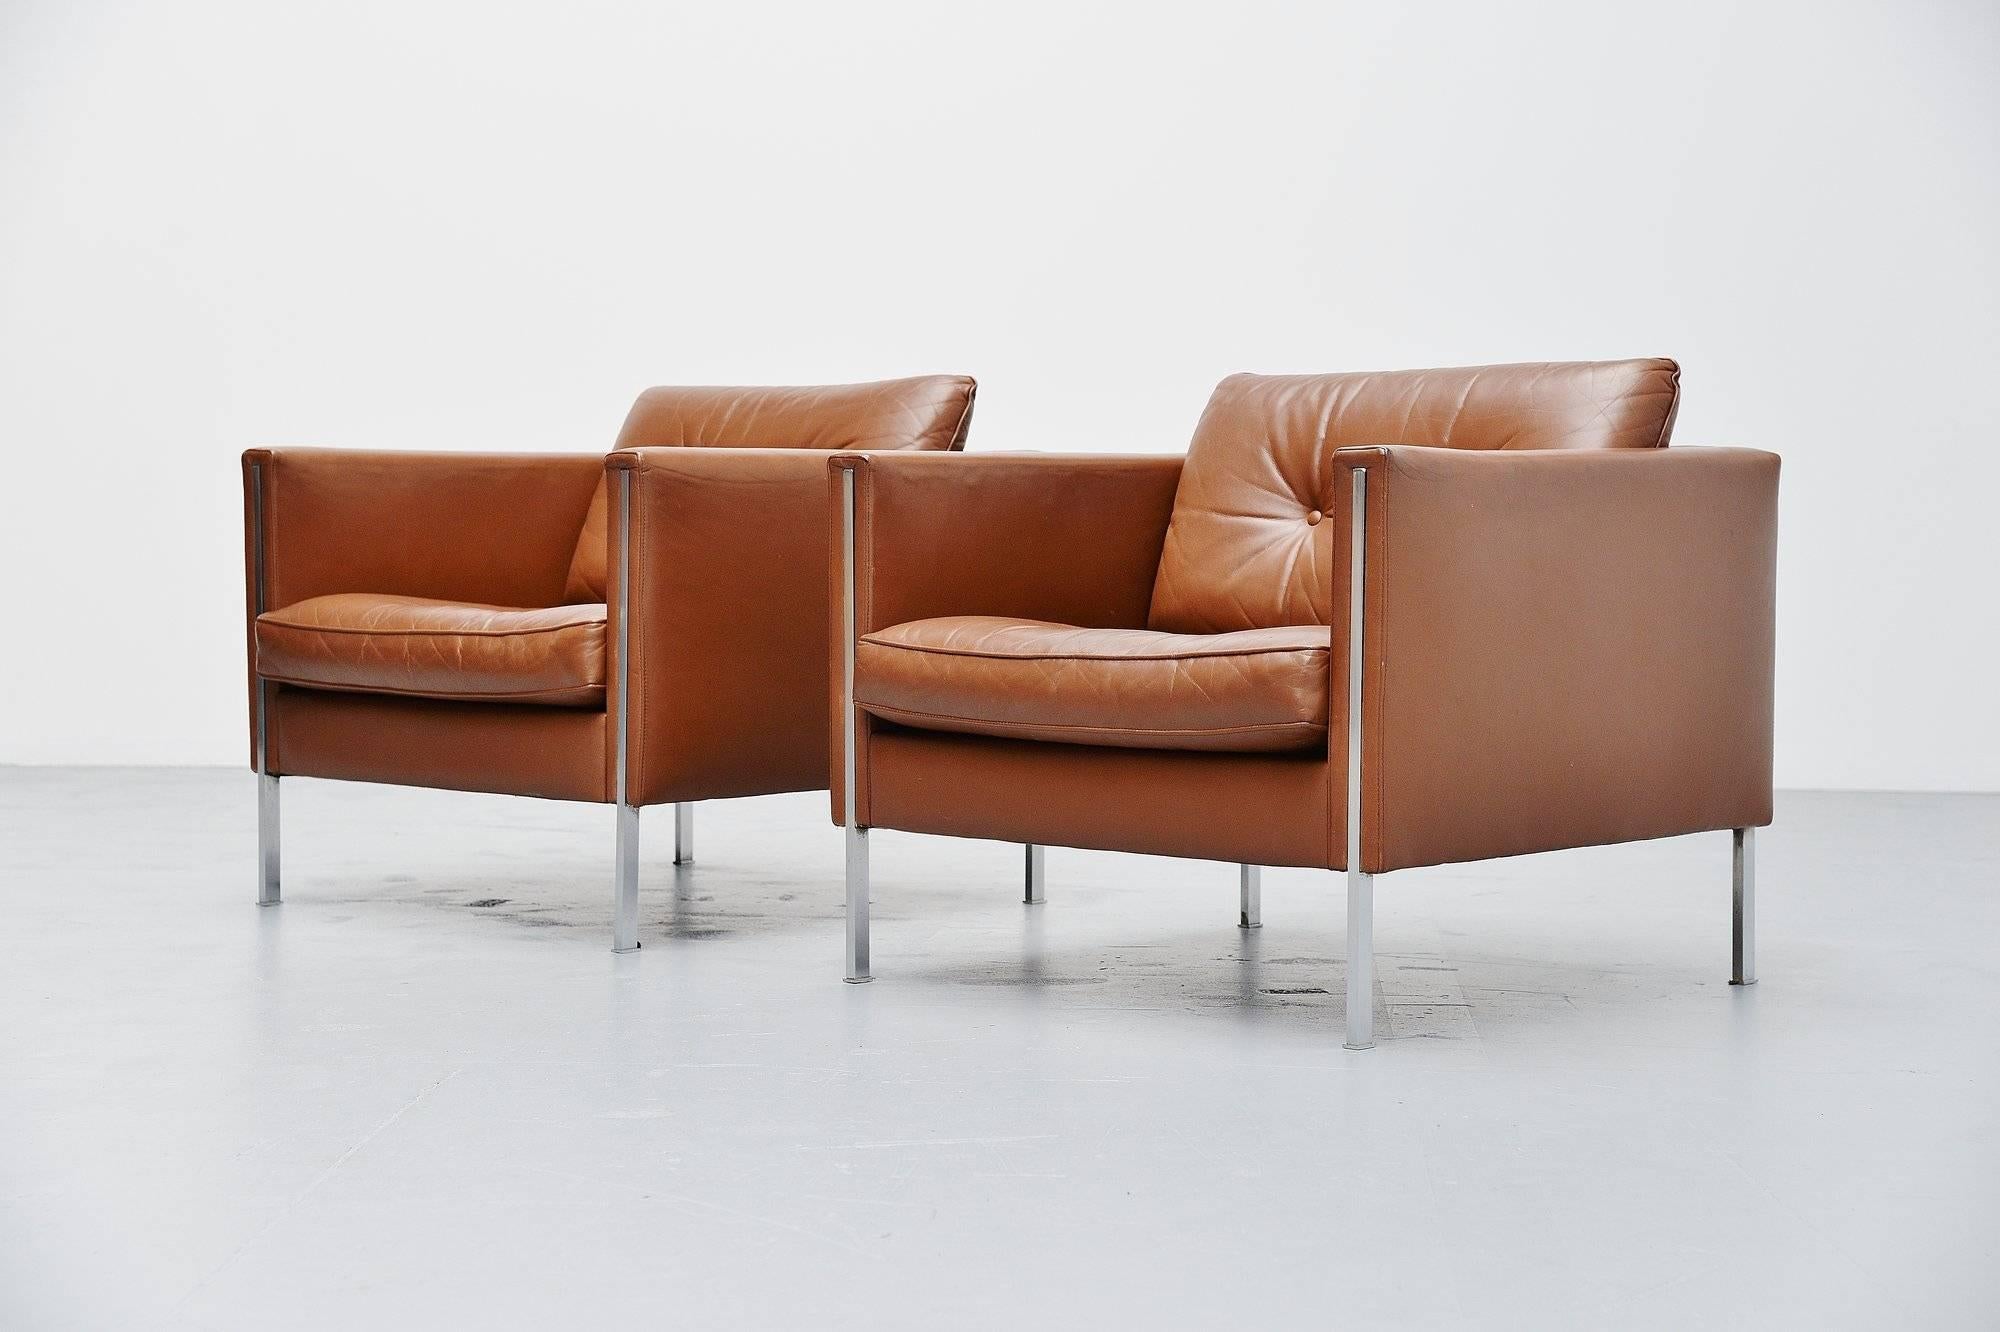 Plated Pierre Paulin 442 Lounge Chairs Artifort, 1962